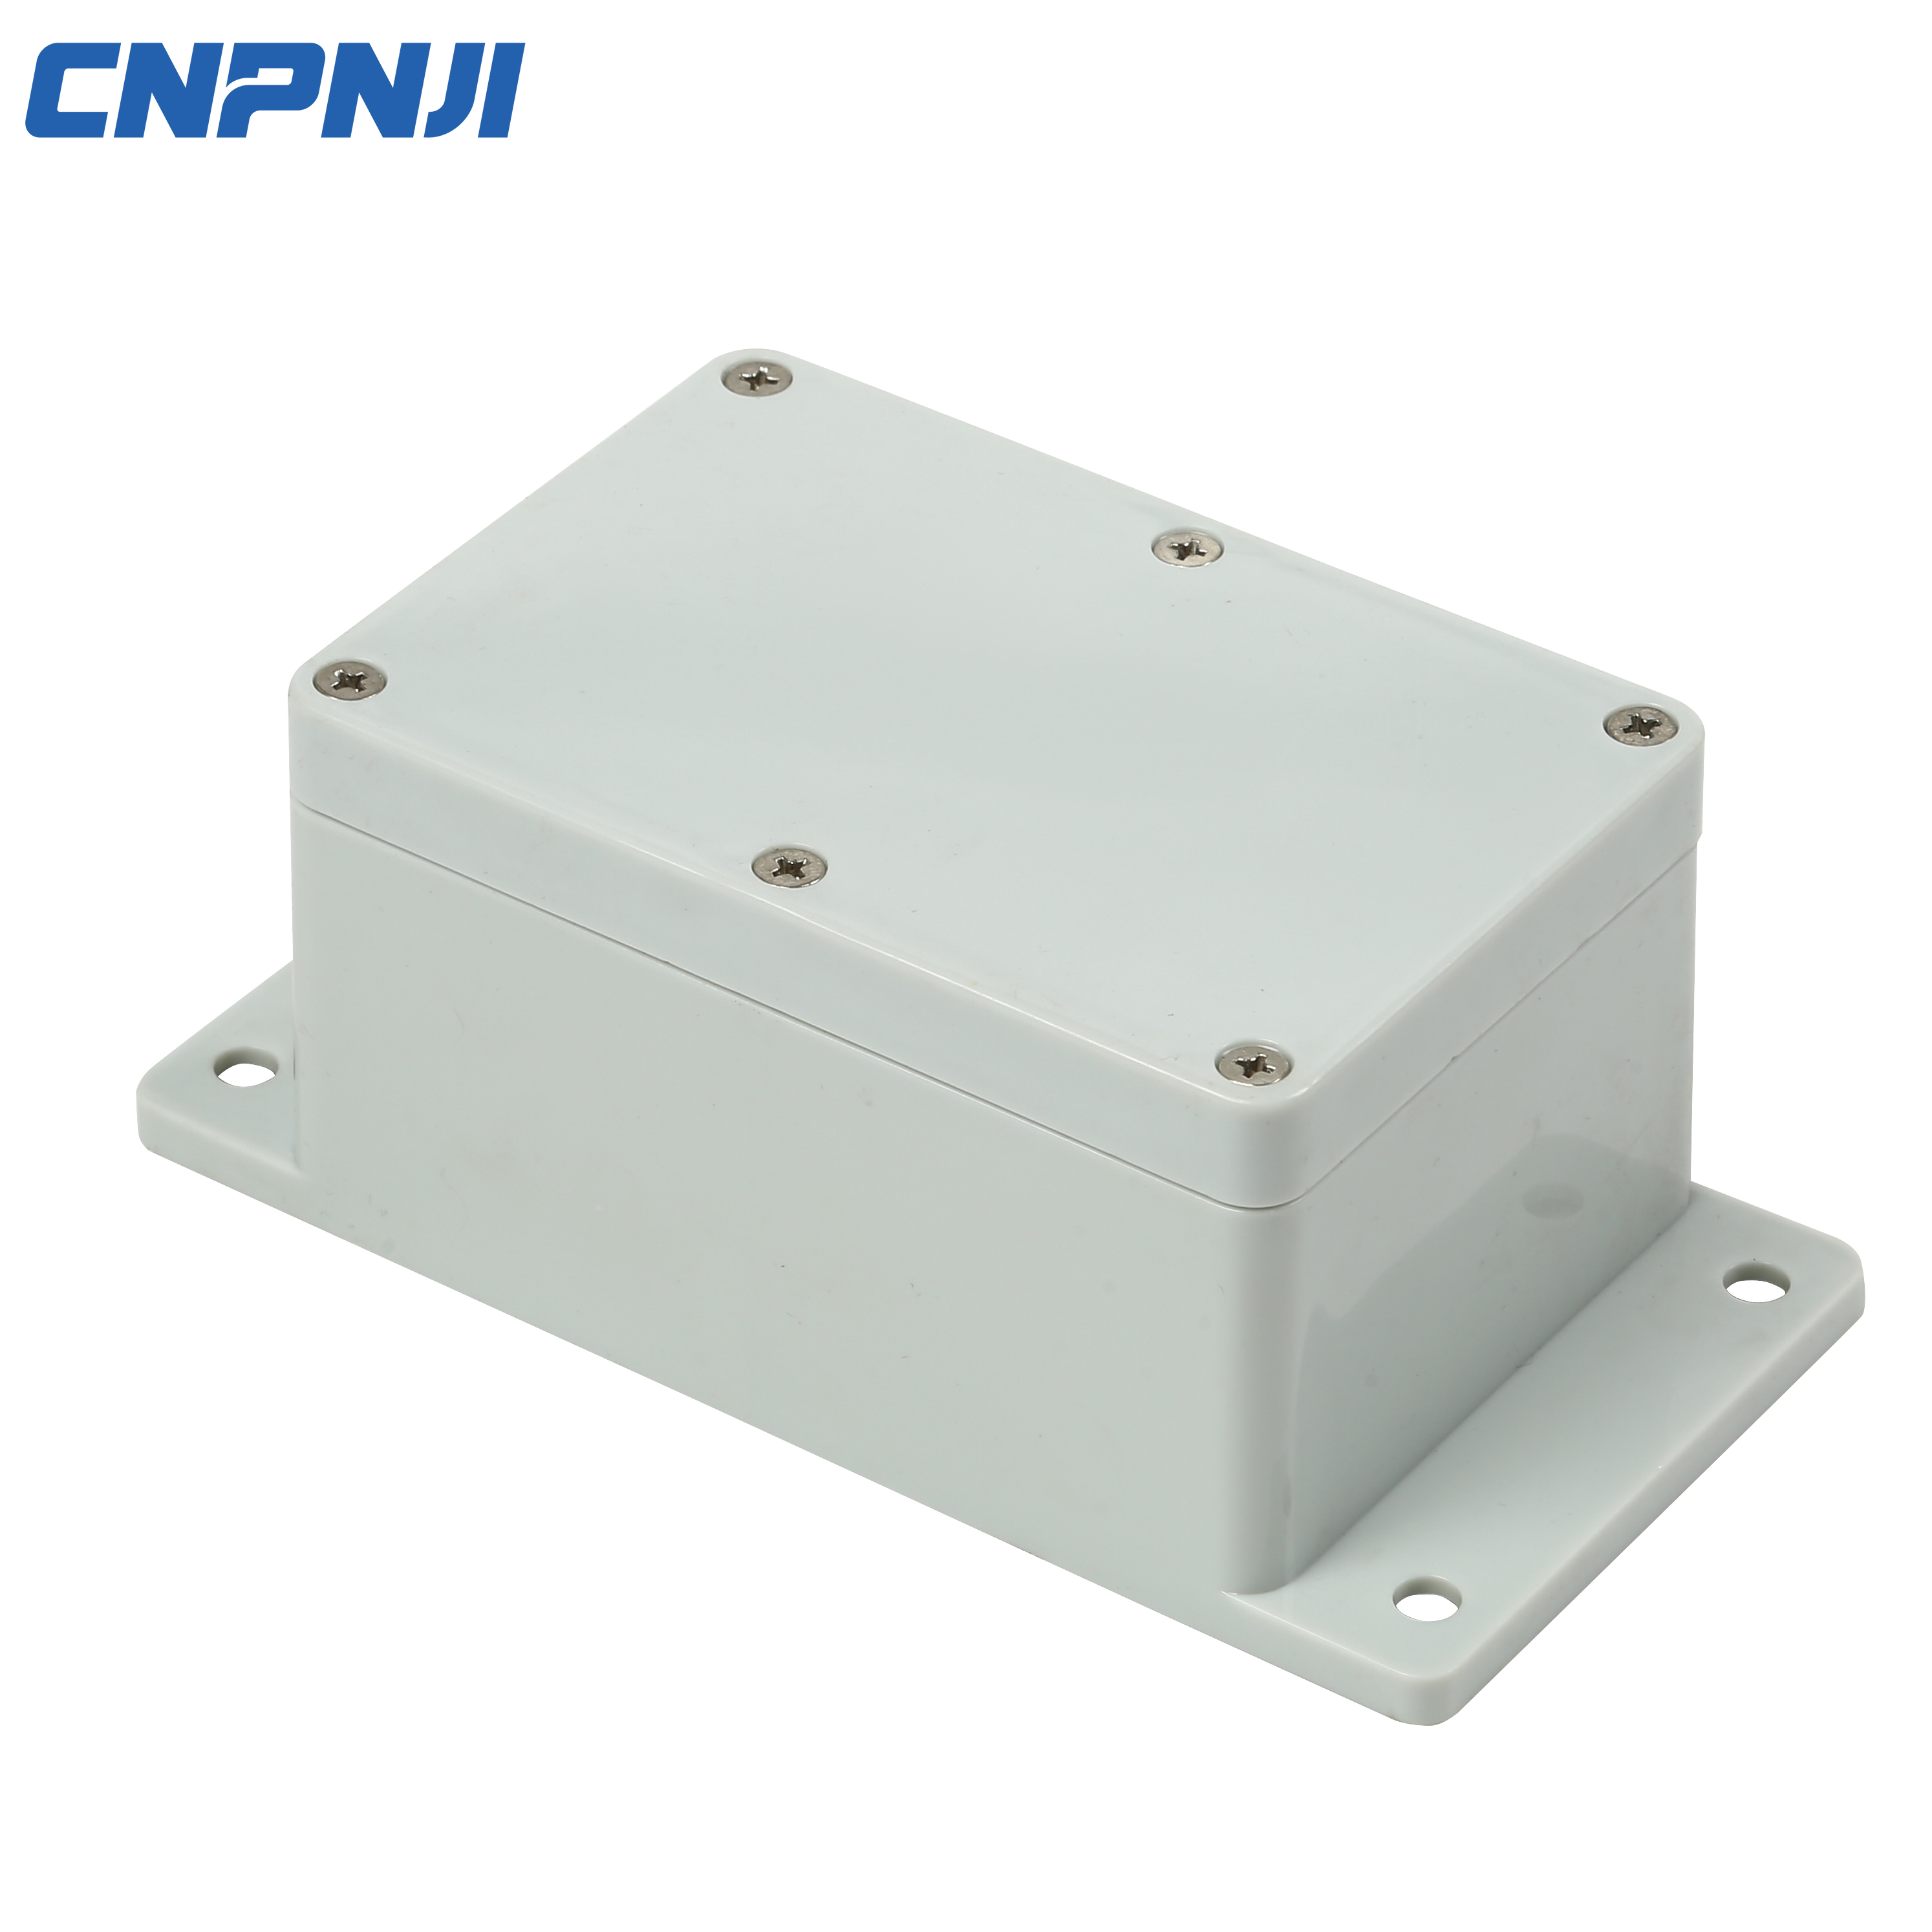 Waterproof Junction Box Materials Selection Guide